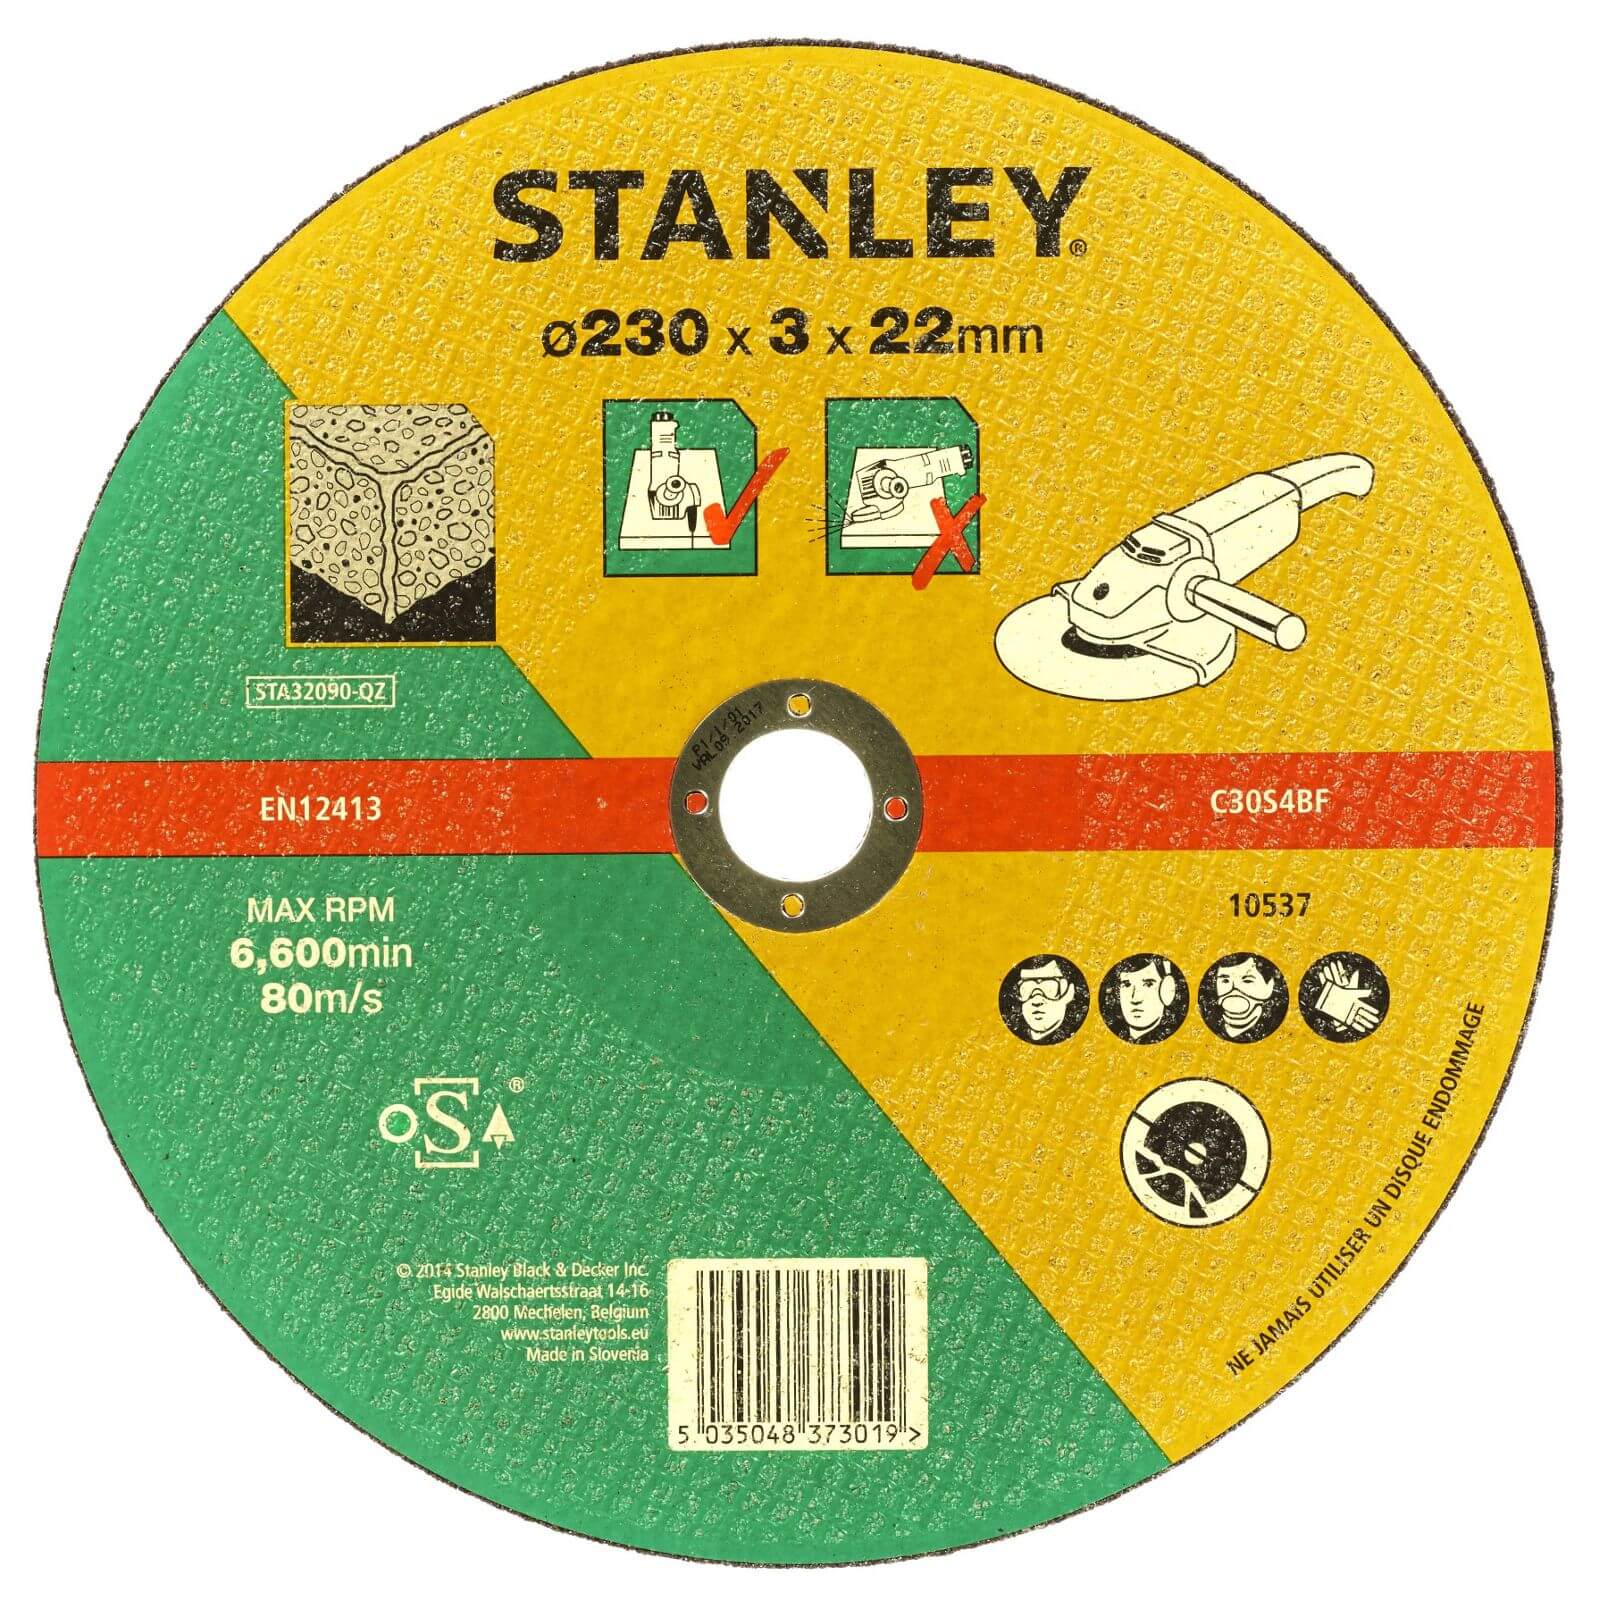 Photo of Stanley 230mm Stone Cutting Disc - Sta32090-qz